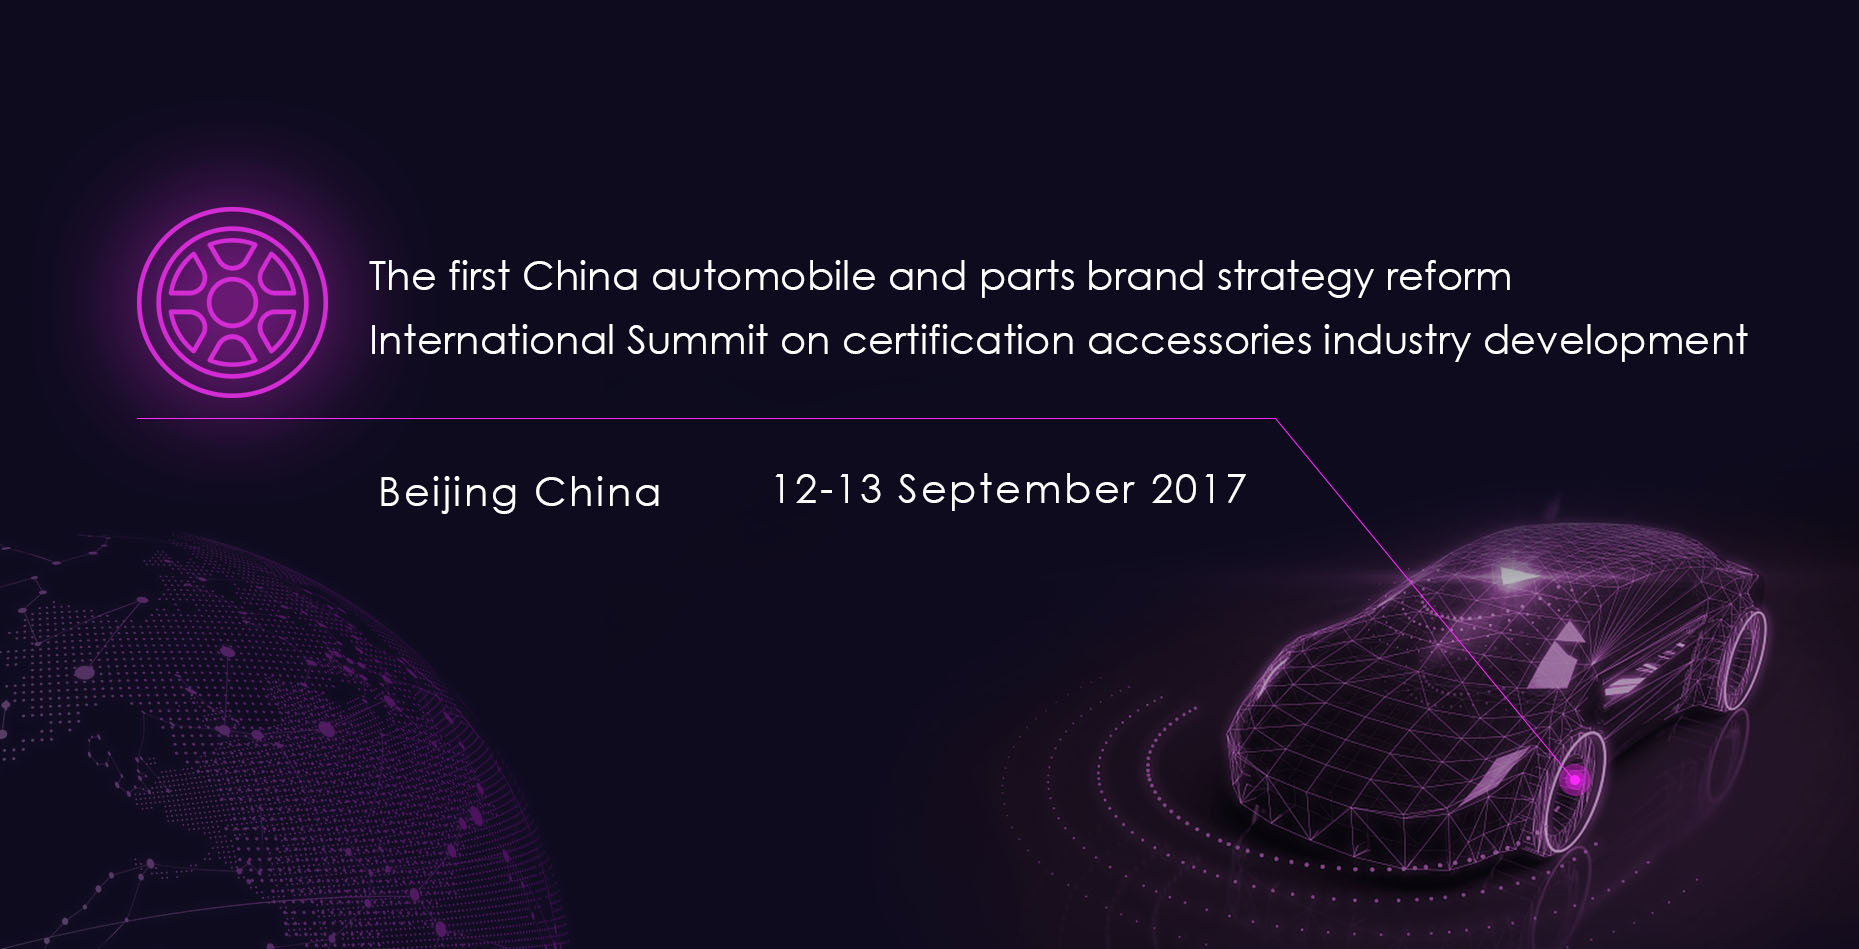 2017 the first China automobile and parts brand strategy change and certification of accessories ind